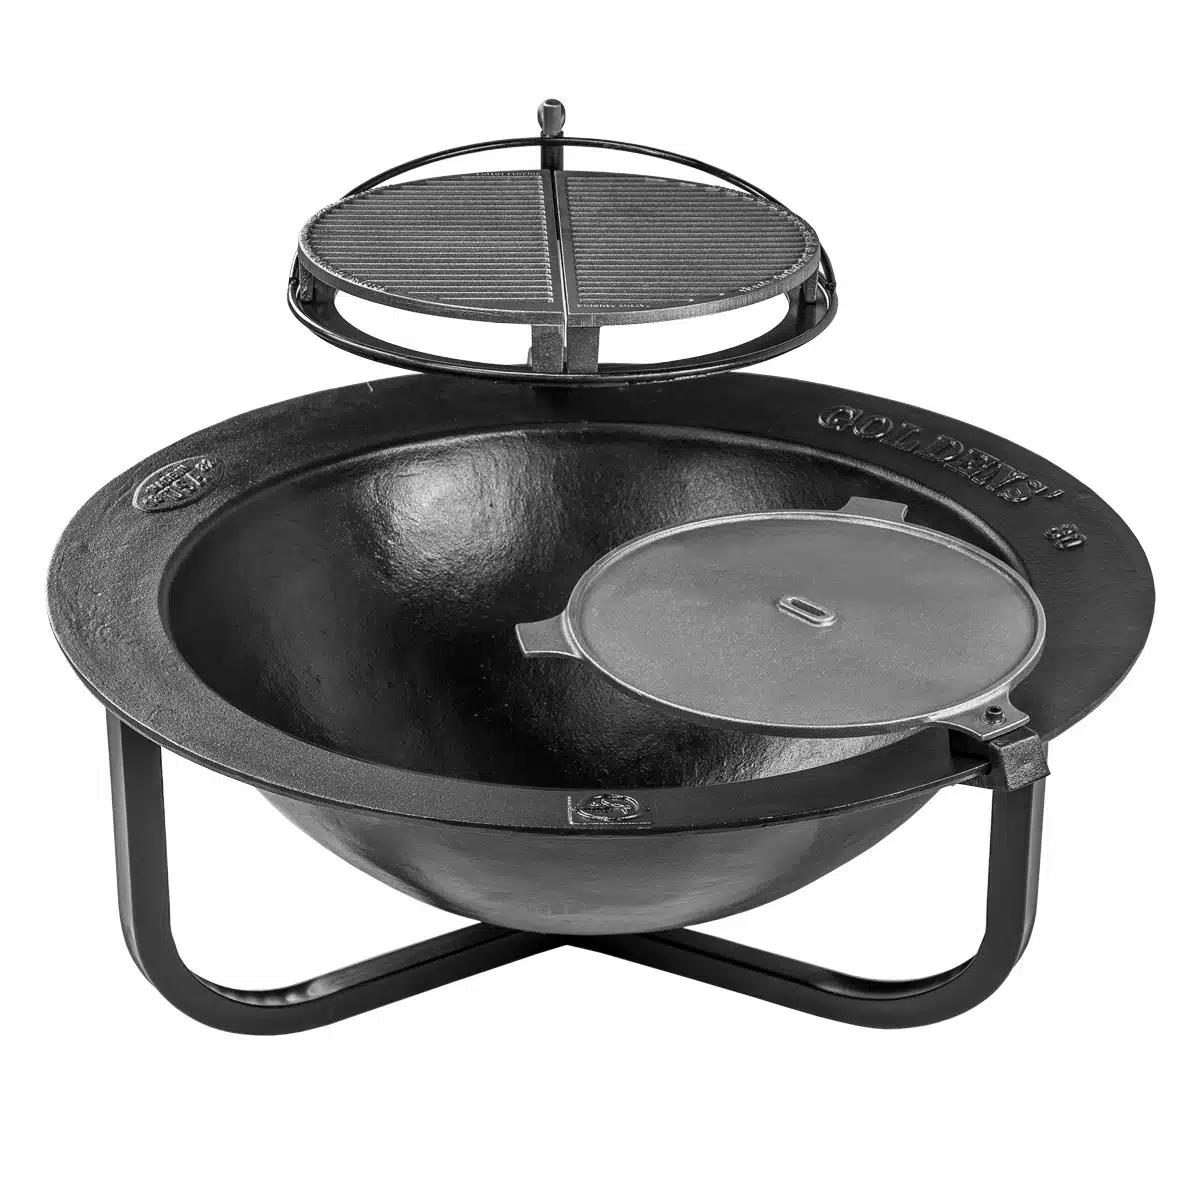 Goldens' Cast Iron 30 Gal Fire Pit w/Cooking System Bundle